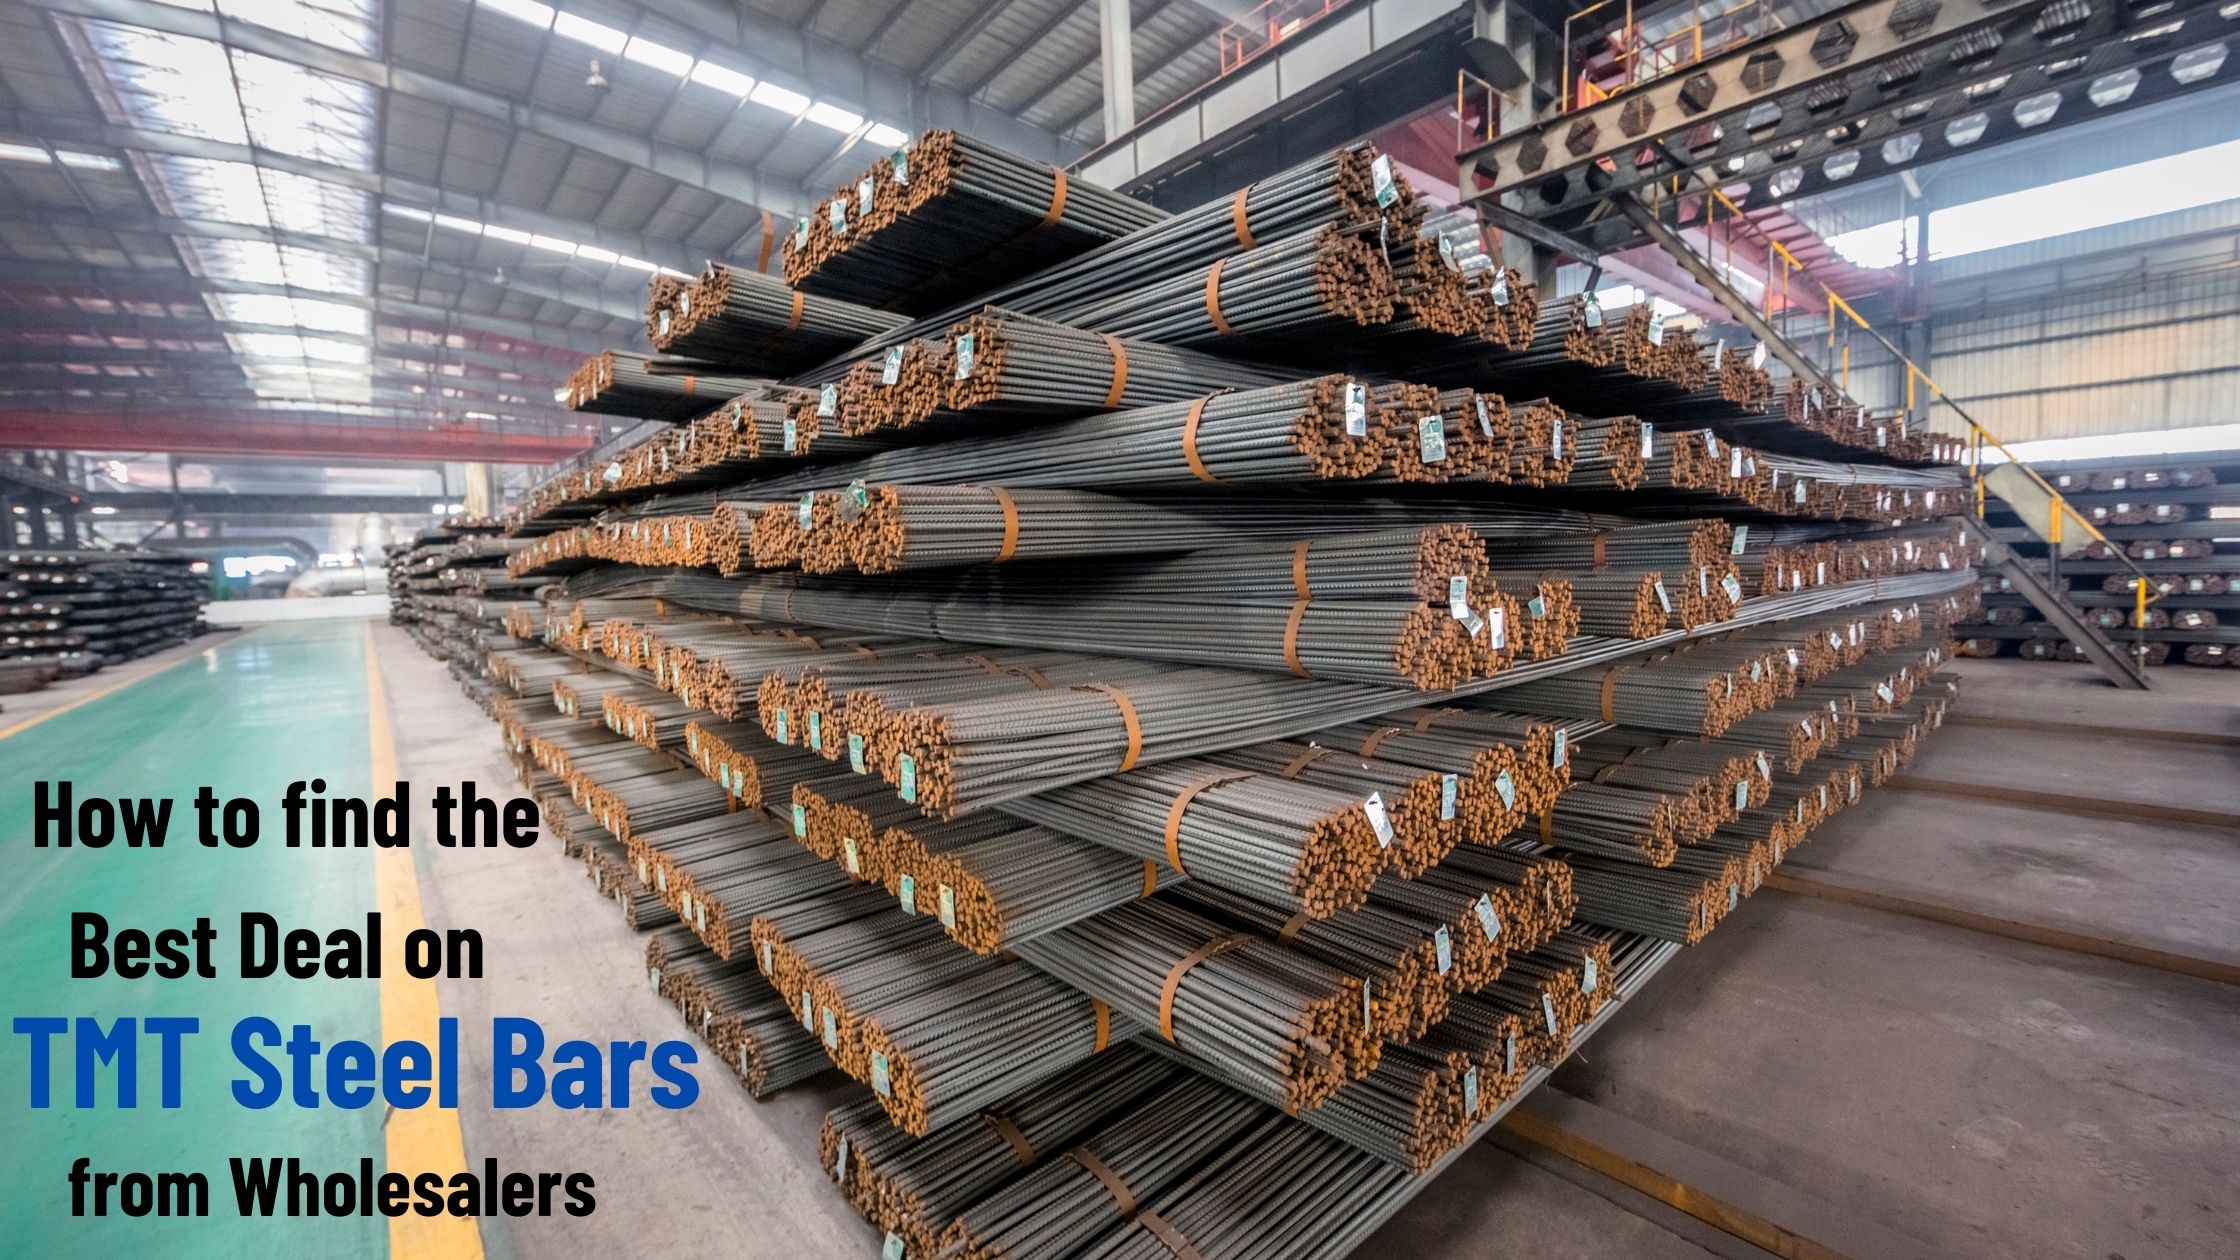 How To Find The Best Deal on TMT Steel Bars from Wholesalers